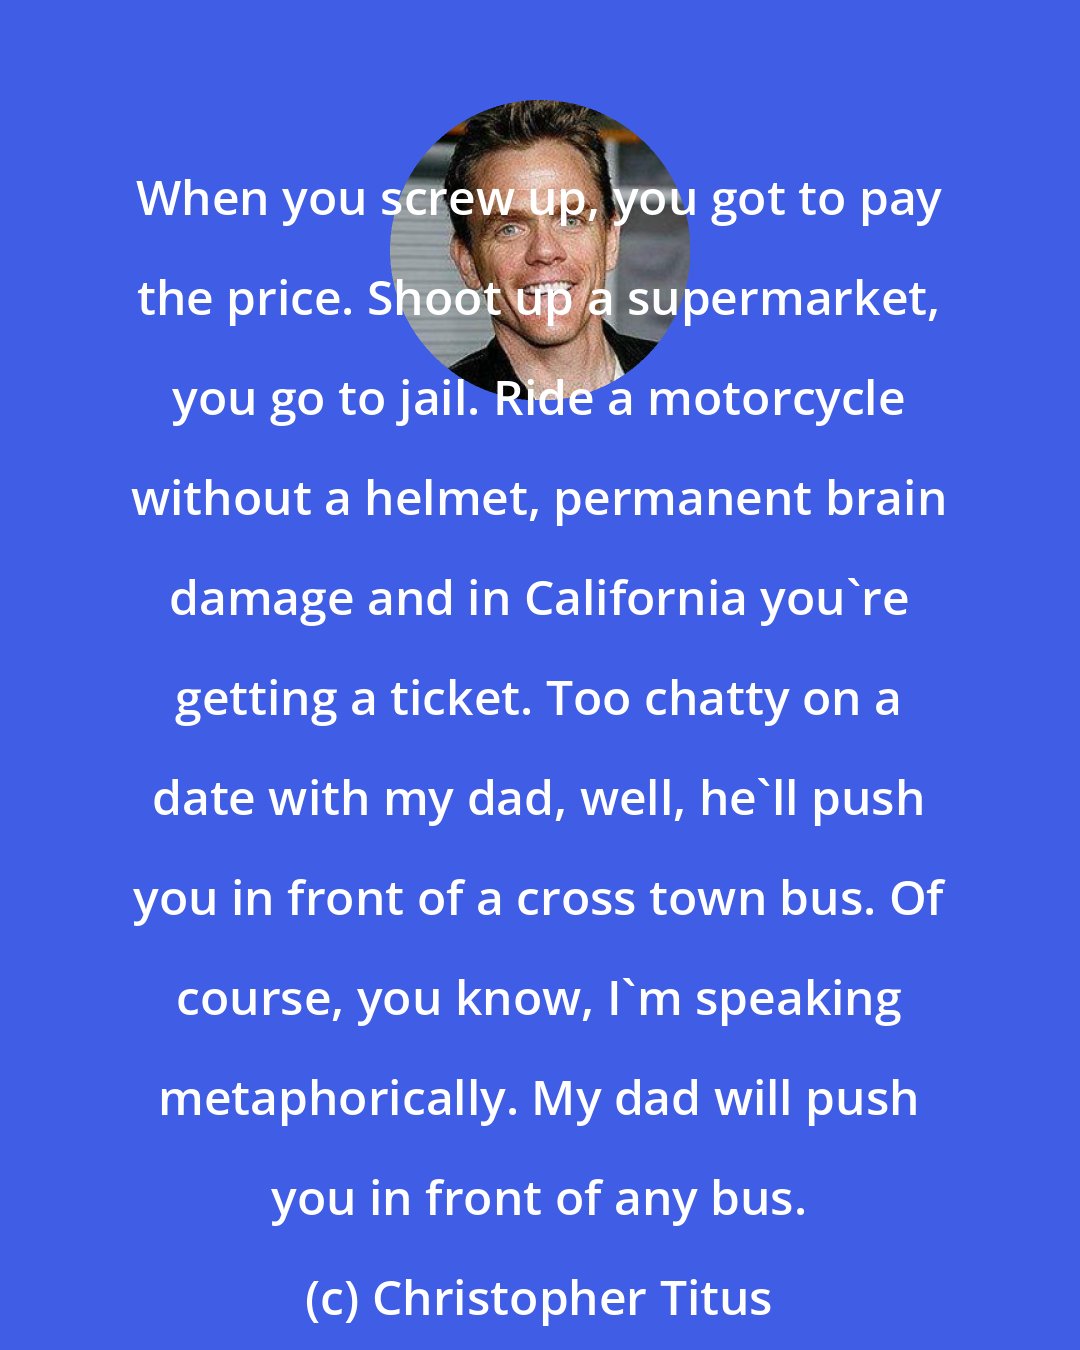 Christopher Titus: When you screw up, you got to pay the price. Shoot up a supermarket, you go to jail. Ride a motorcycle without a helmet, permanent brain damage and in California you're getting a ticket. Too chatty on a date with my dad, well, he'll push you in front of a cross town bus. Of course, you know, I'm speaking metaphorically. My dad will push you in front of any bus.